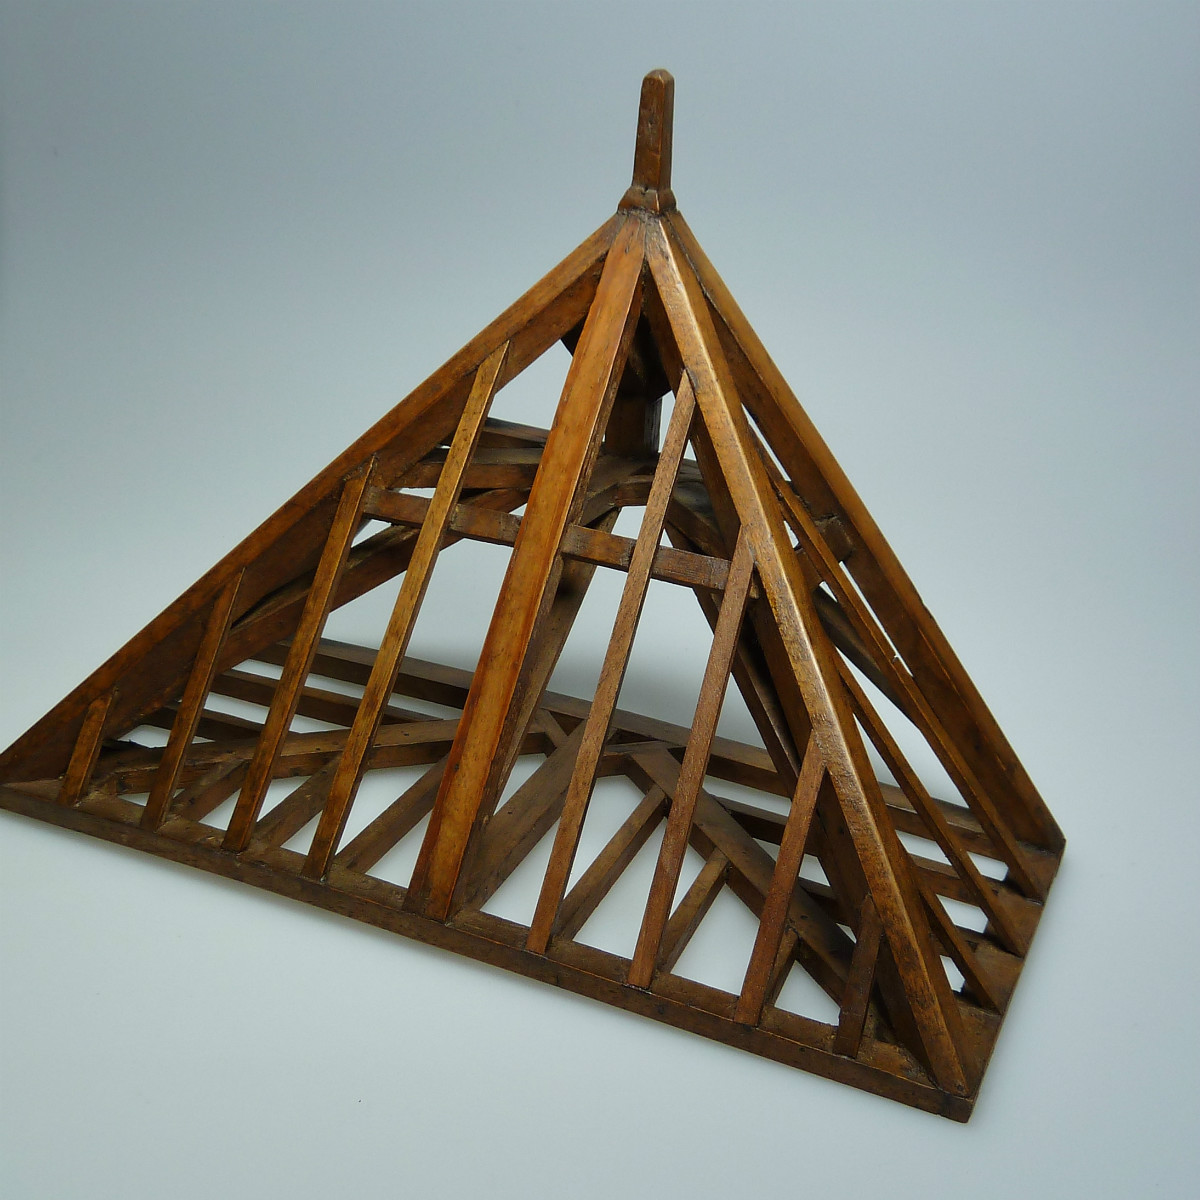 Charpente - roofconstruction model